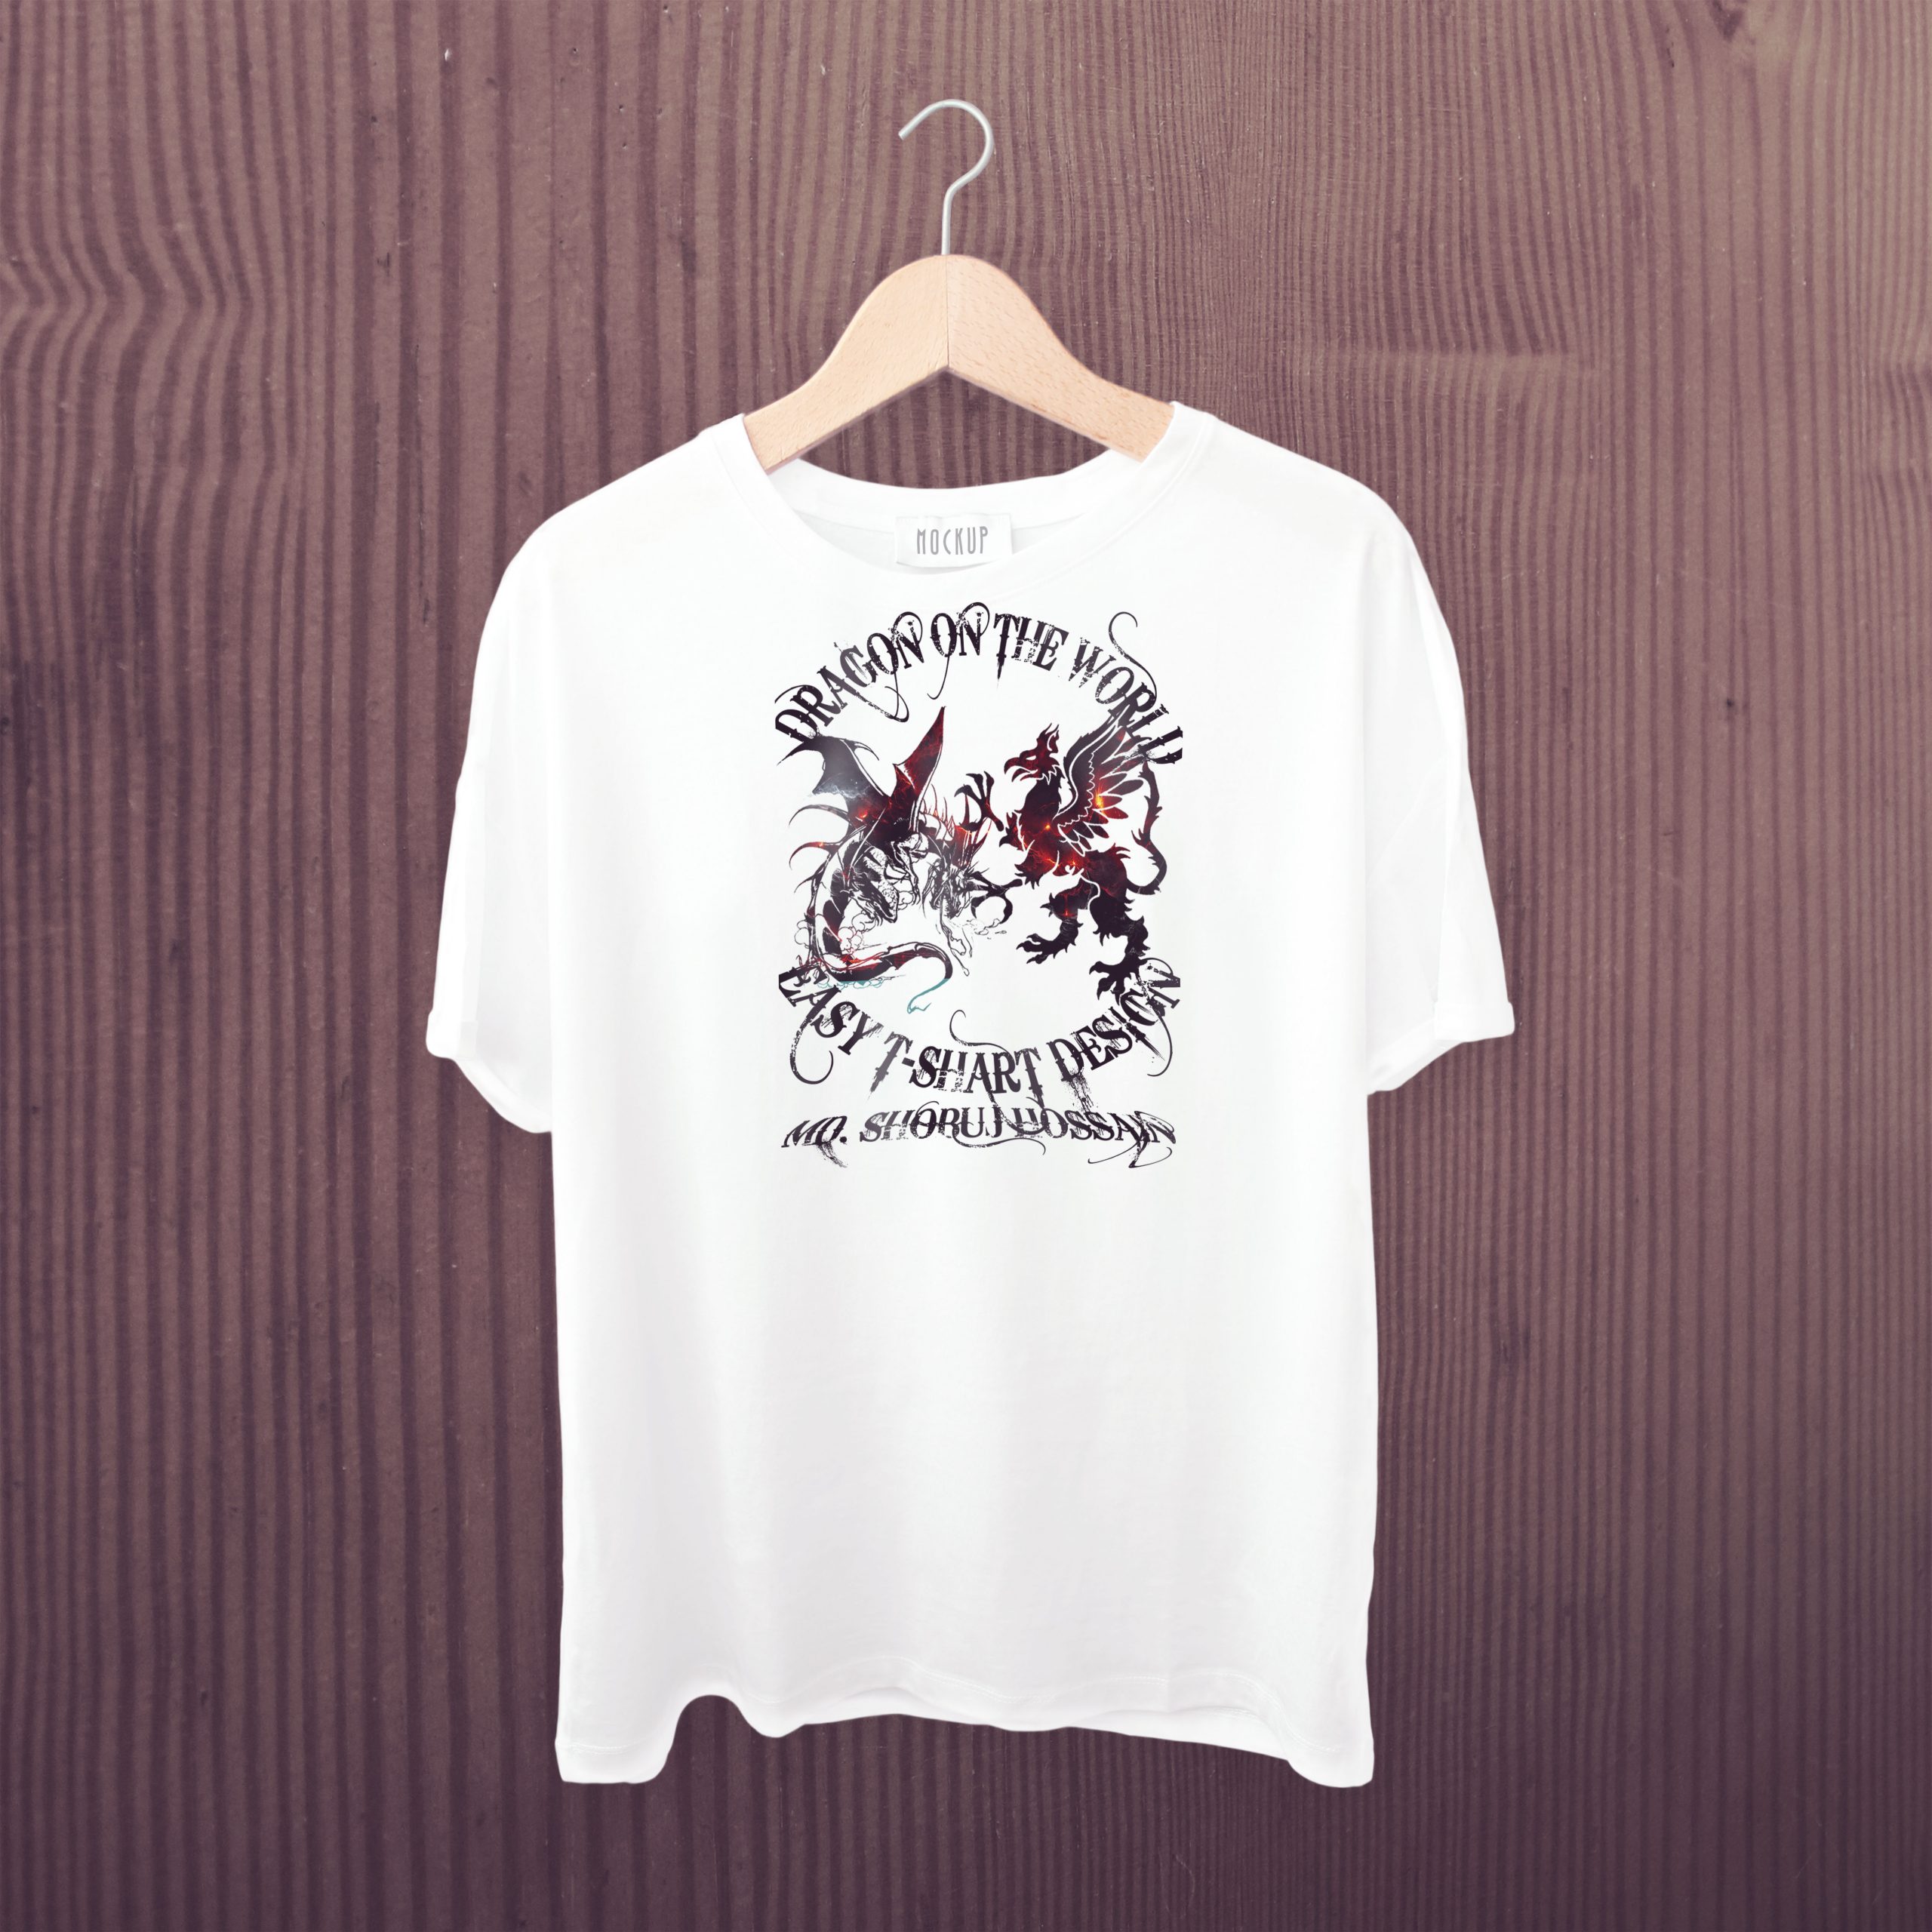 T shirt design with dragon free template